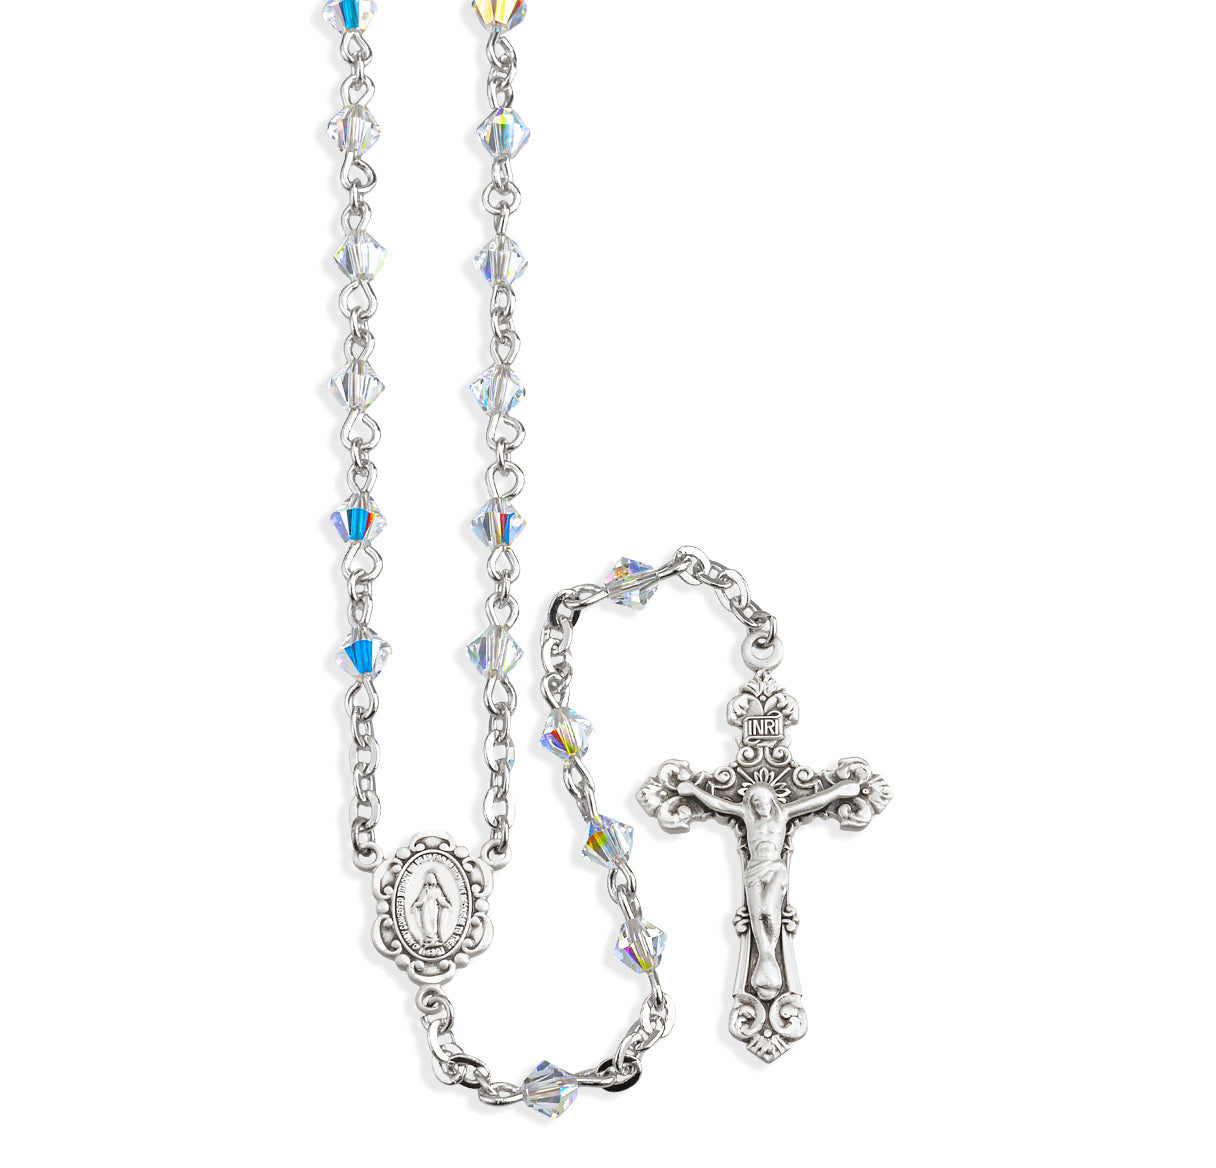 Rosary Sterling Crucifix and Centerpiece Created with Swarovski Crystal 4mm Faceted Tin Cut Bicone Aurora Borealis Beads by HMH